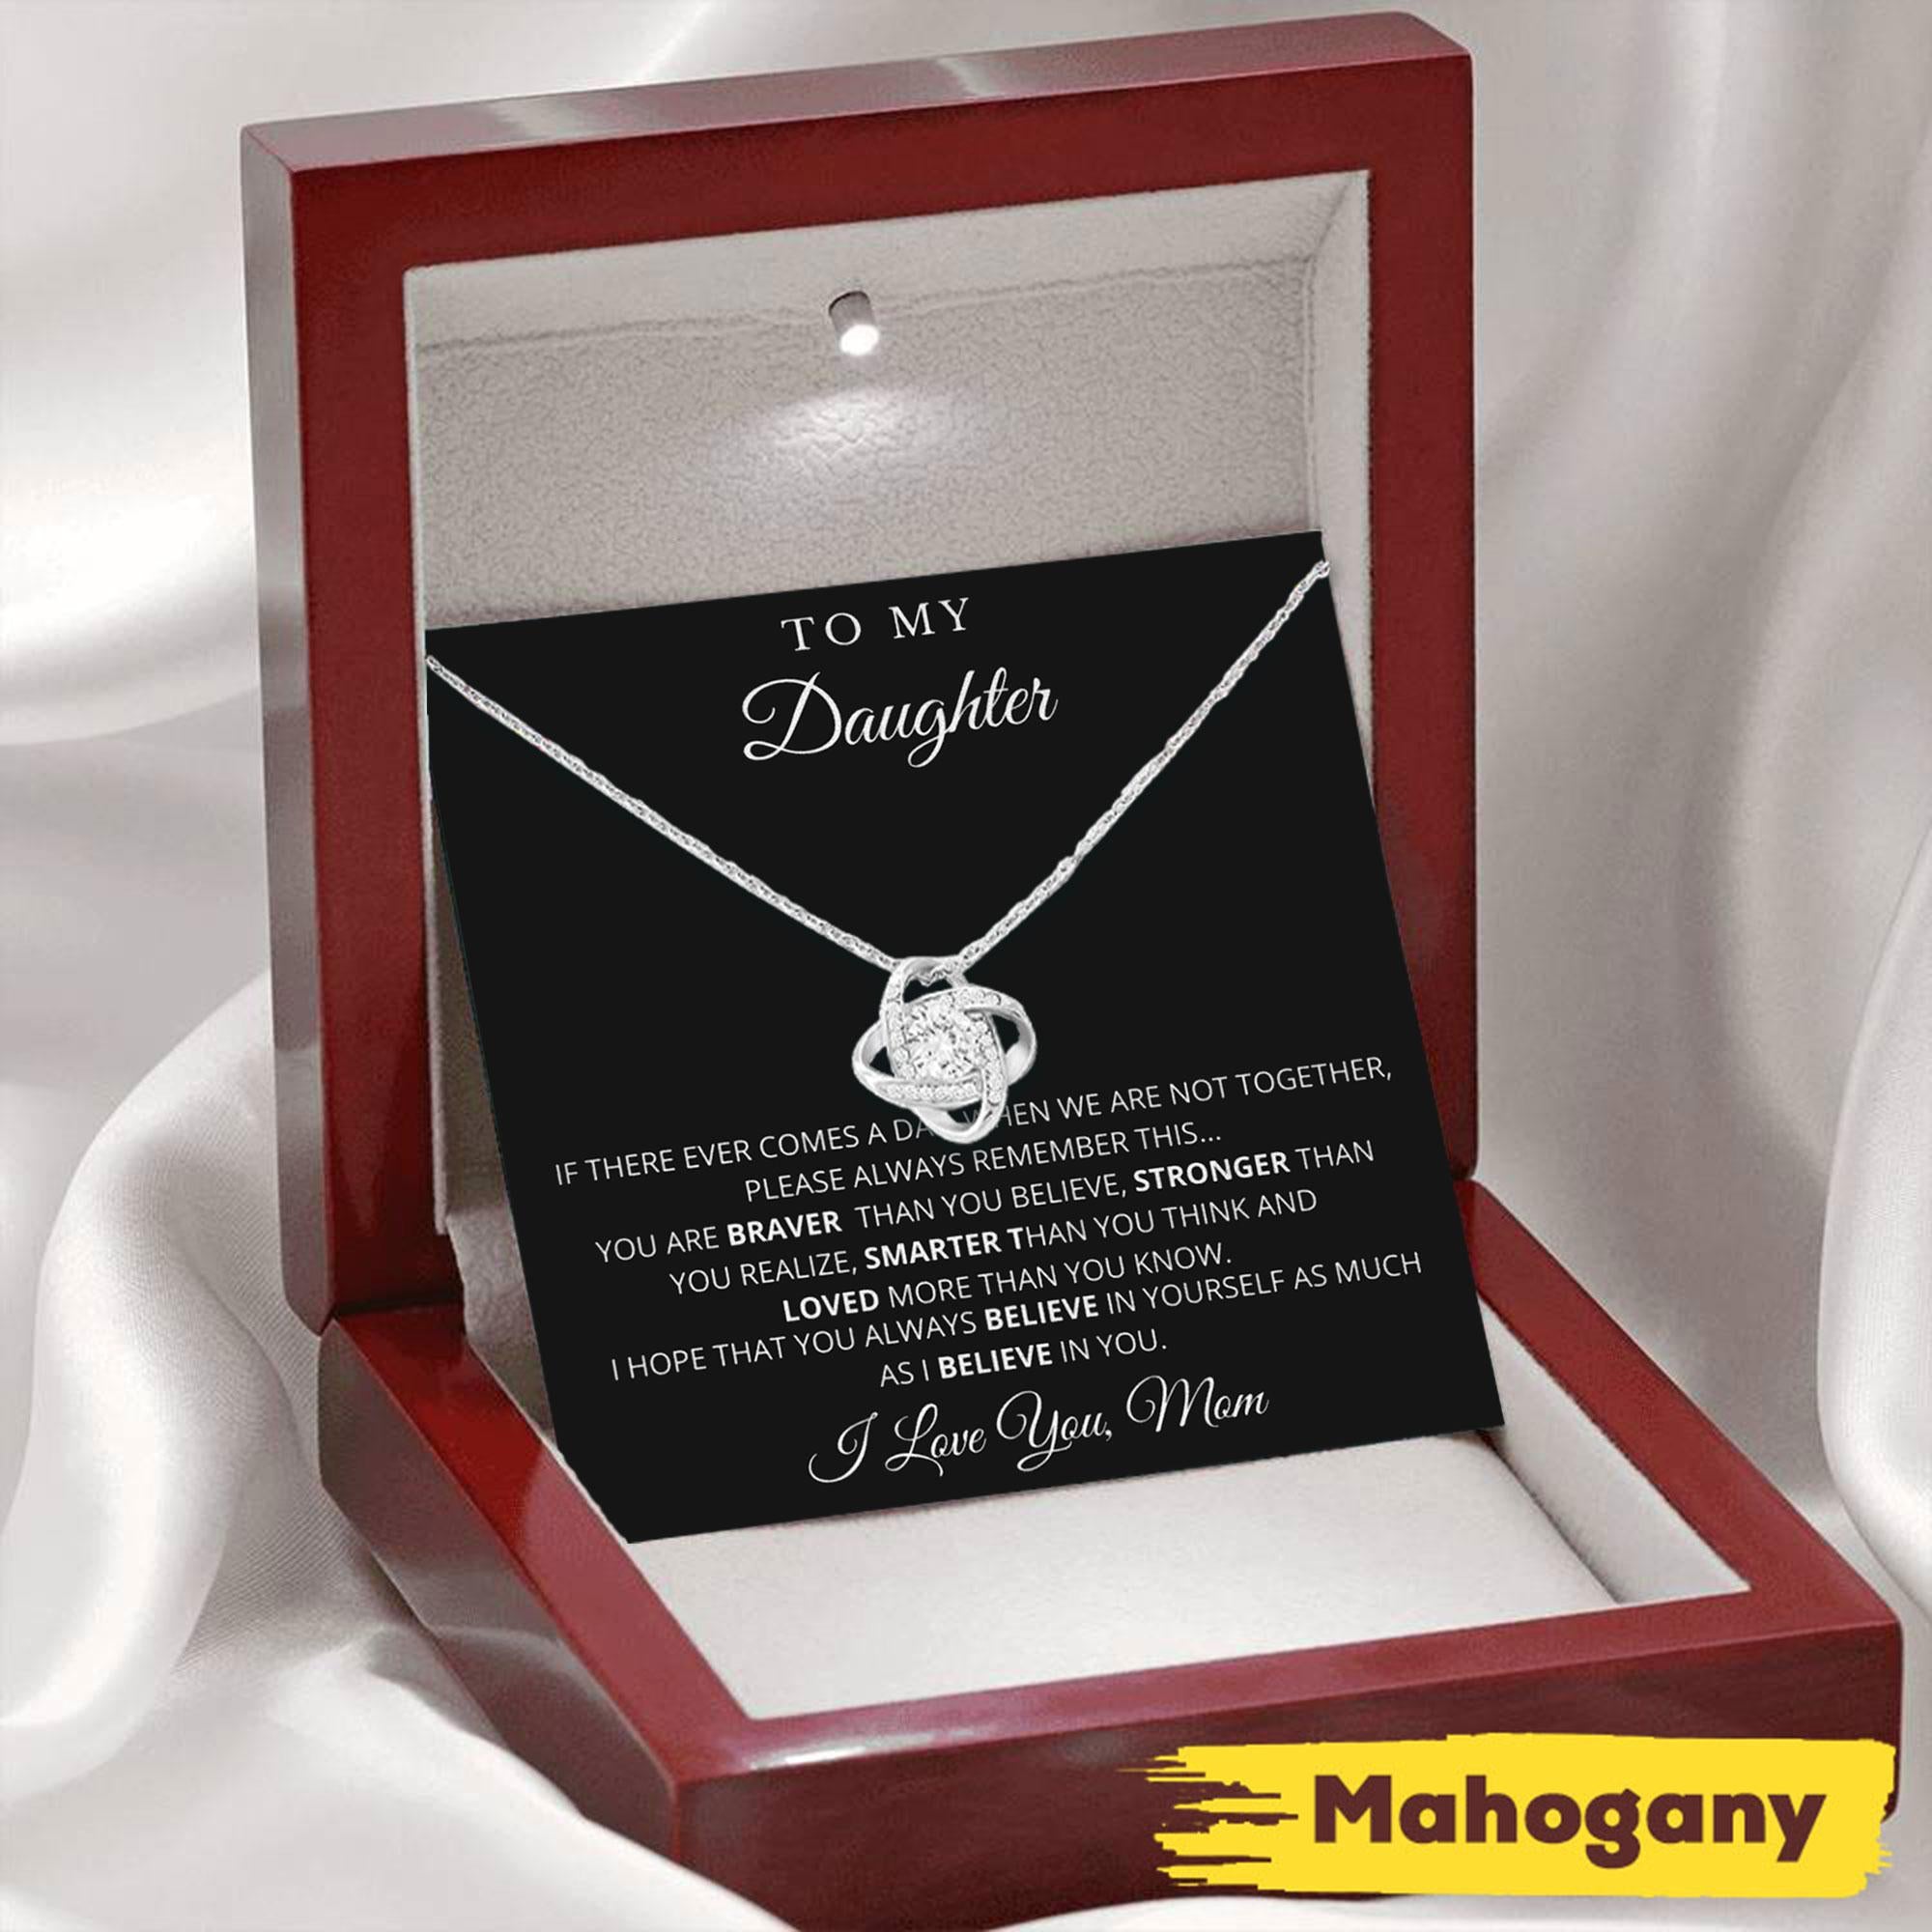 To My Daughter On Becoming A Mother Gift Daughter After Pregnancy - Daughter Love Knot Necklace 0921